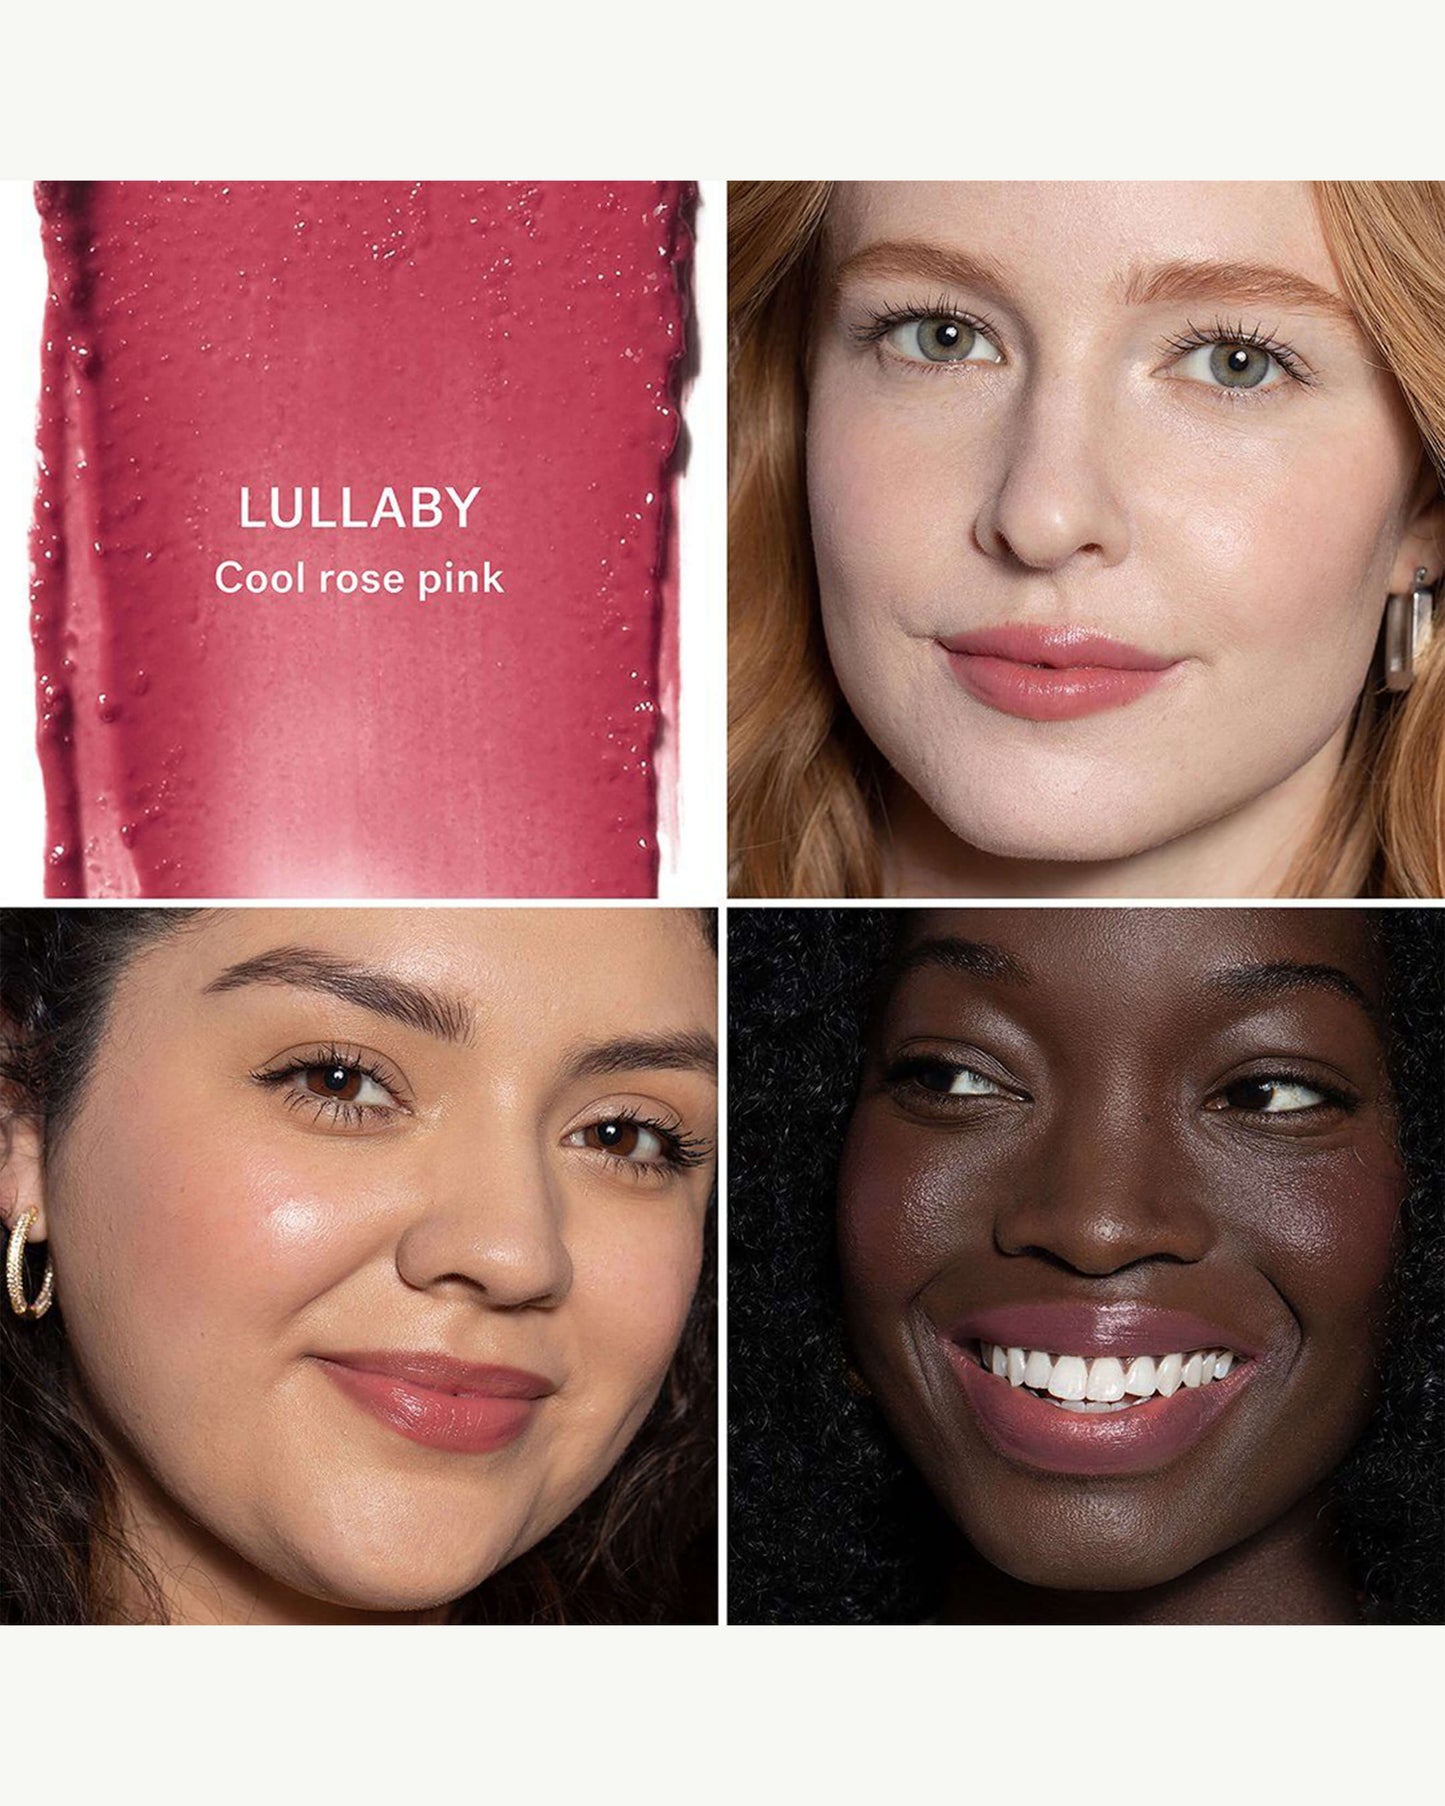 Lullaby (rose pink with cool undertones)